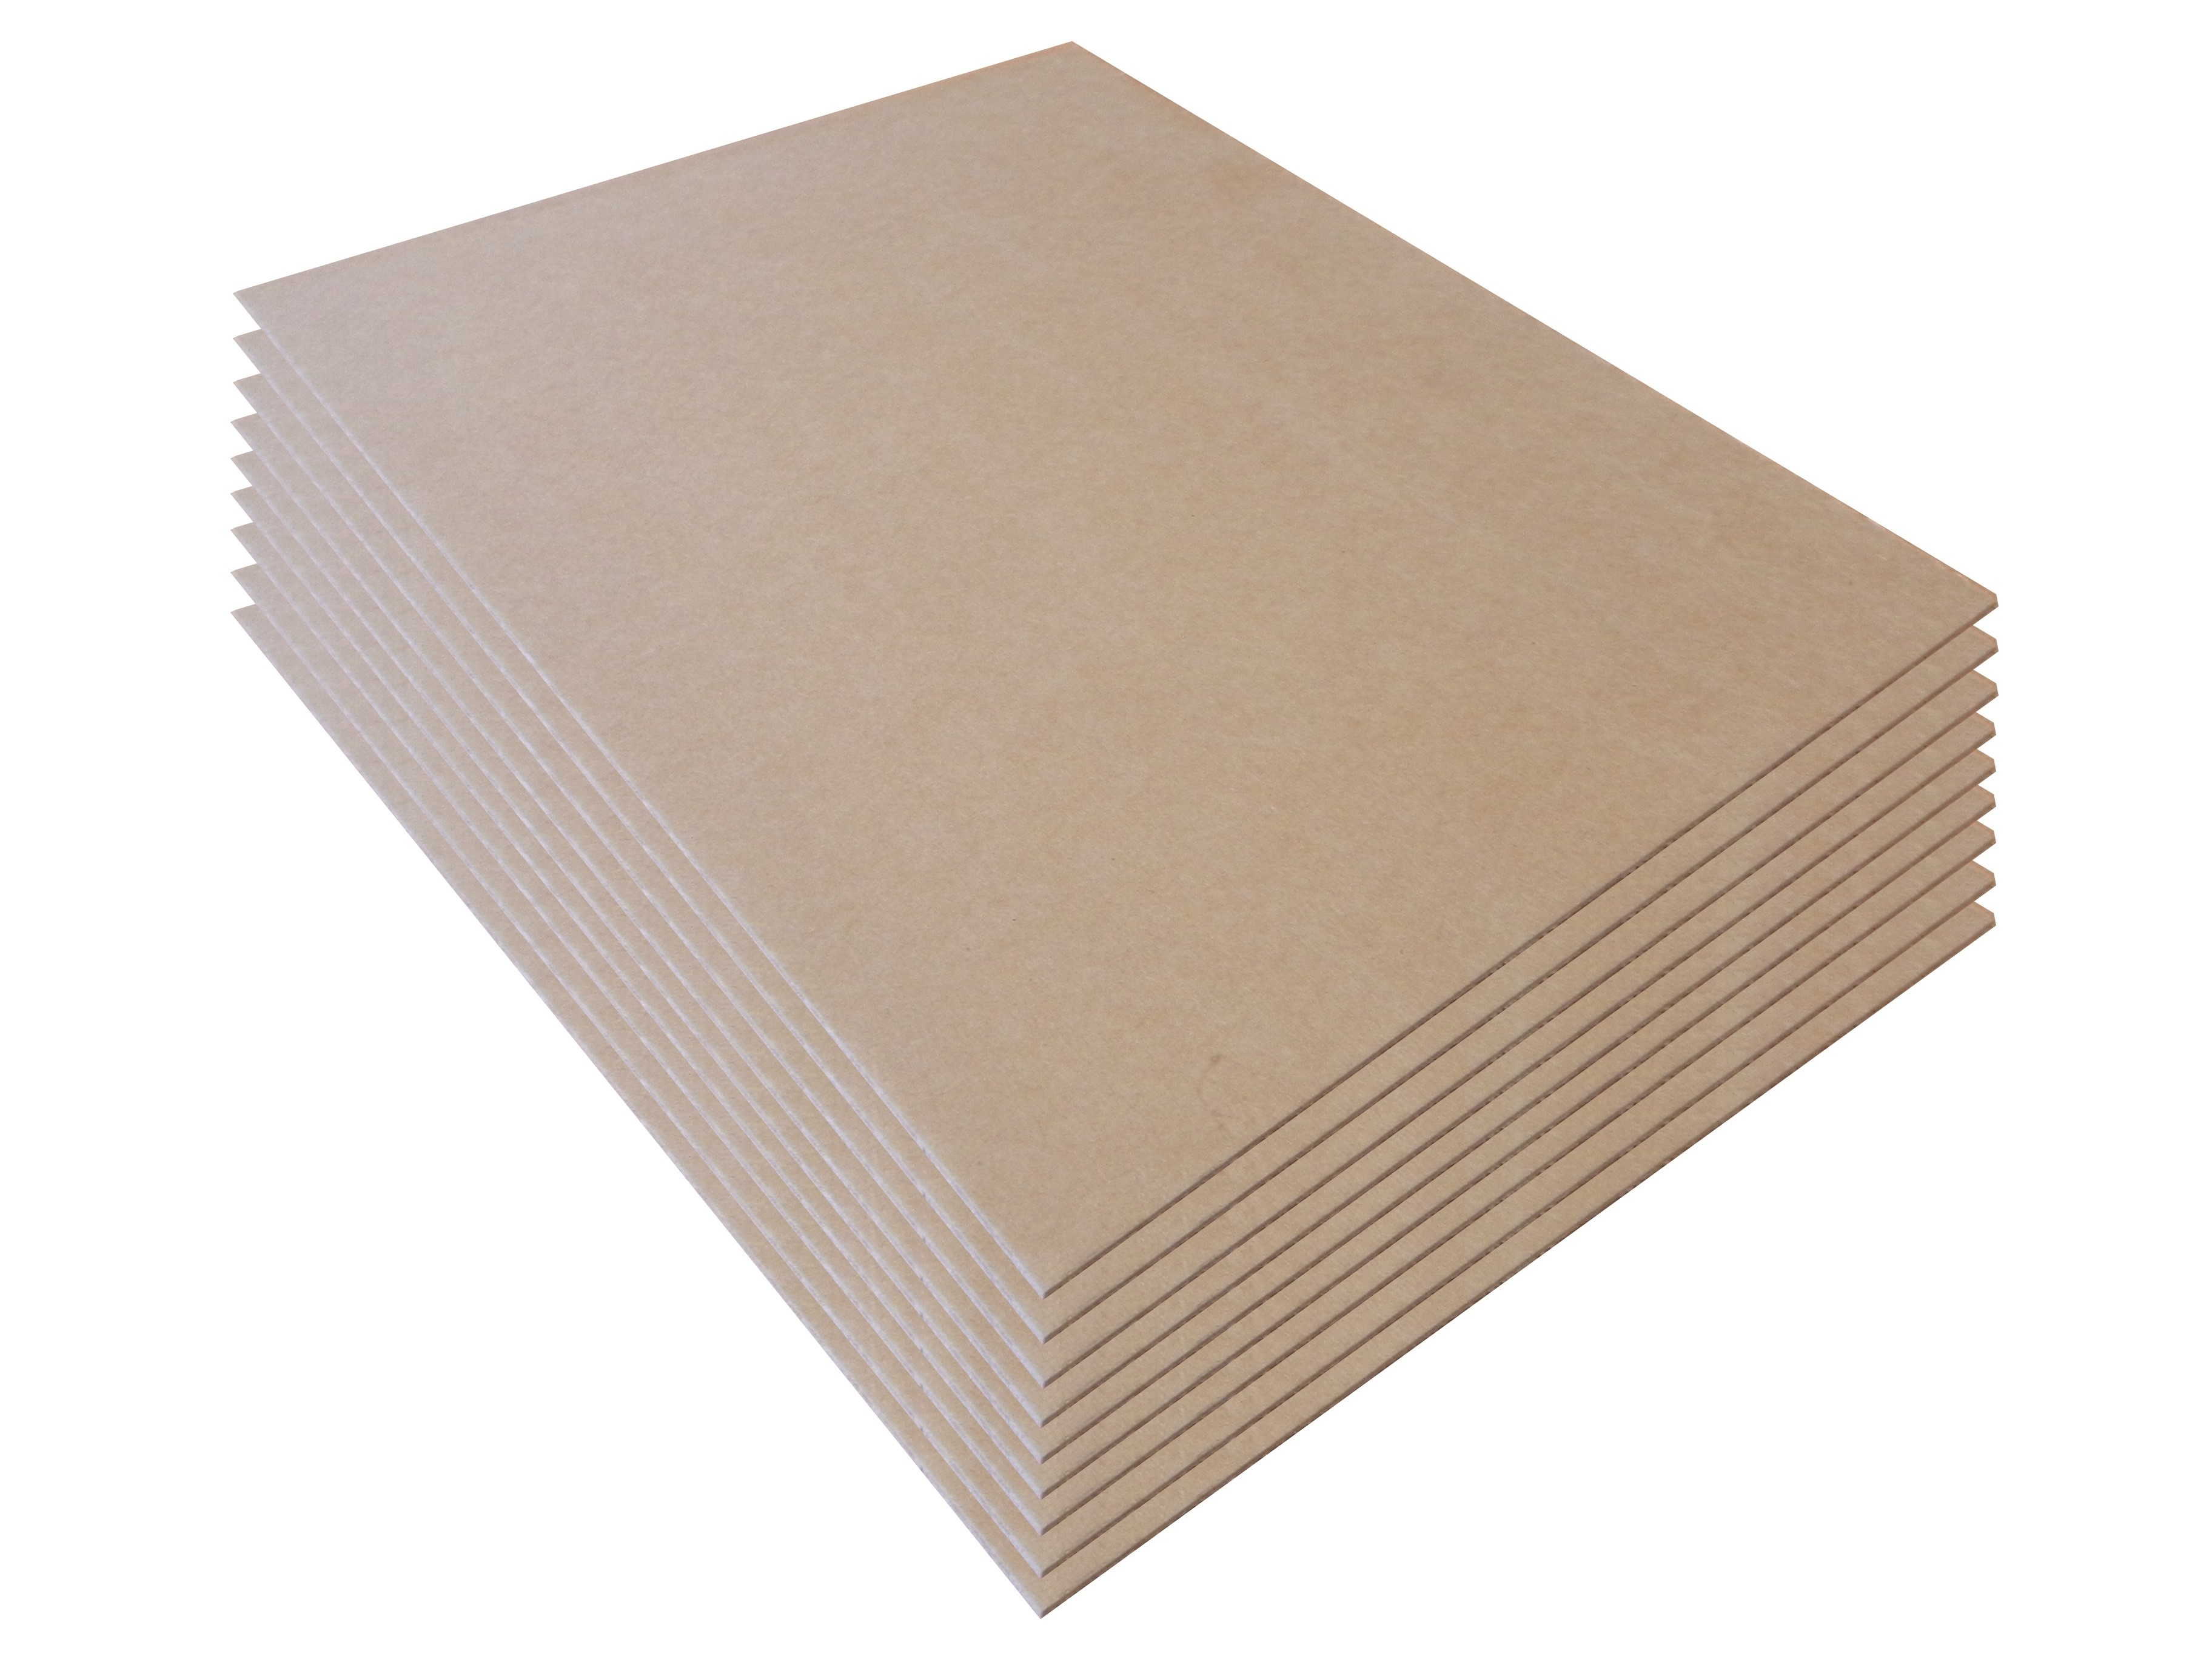 Backing Board 600 x 500mm - 10 pack